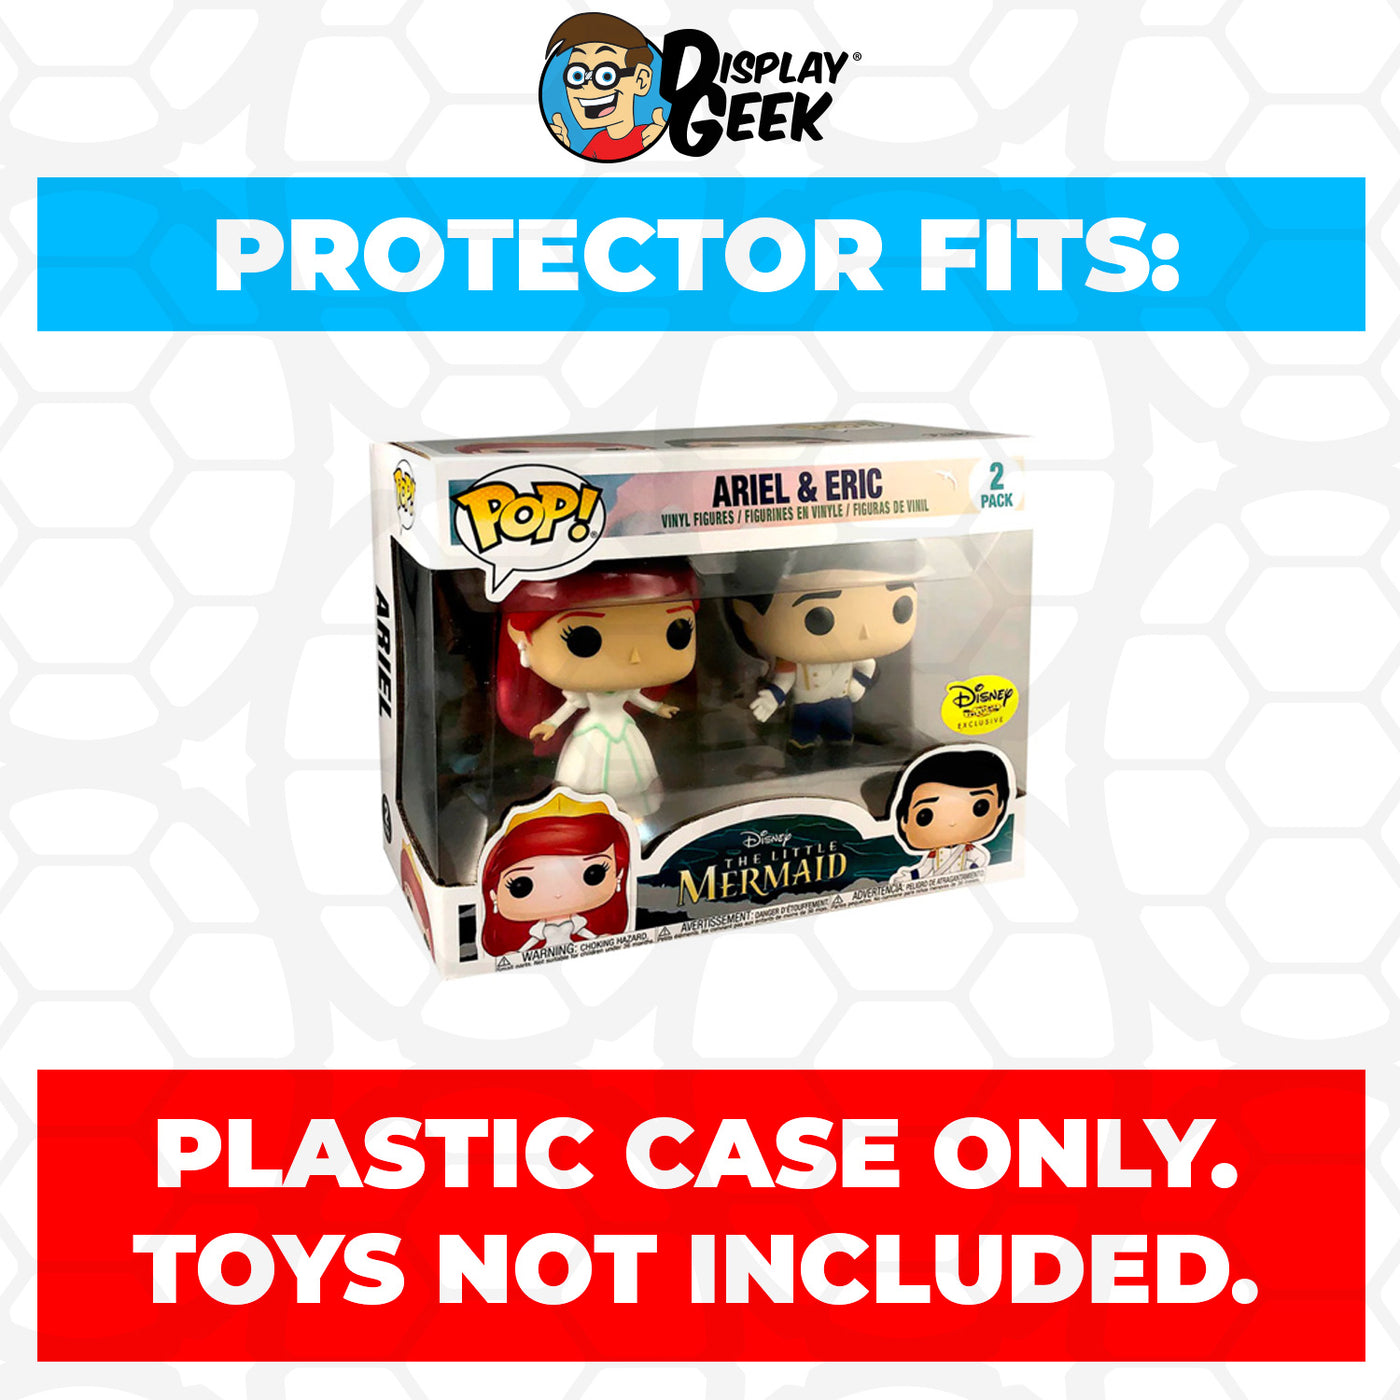 Pop Protector for 2 Pack Ariel & Eric Wedding Funko Pop on The Protector Guide App by Display Geek